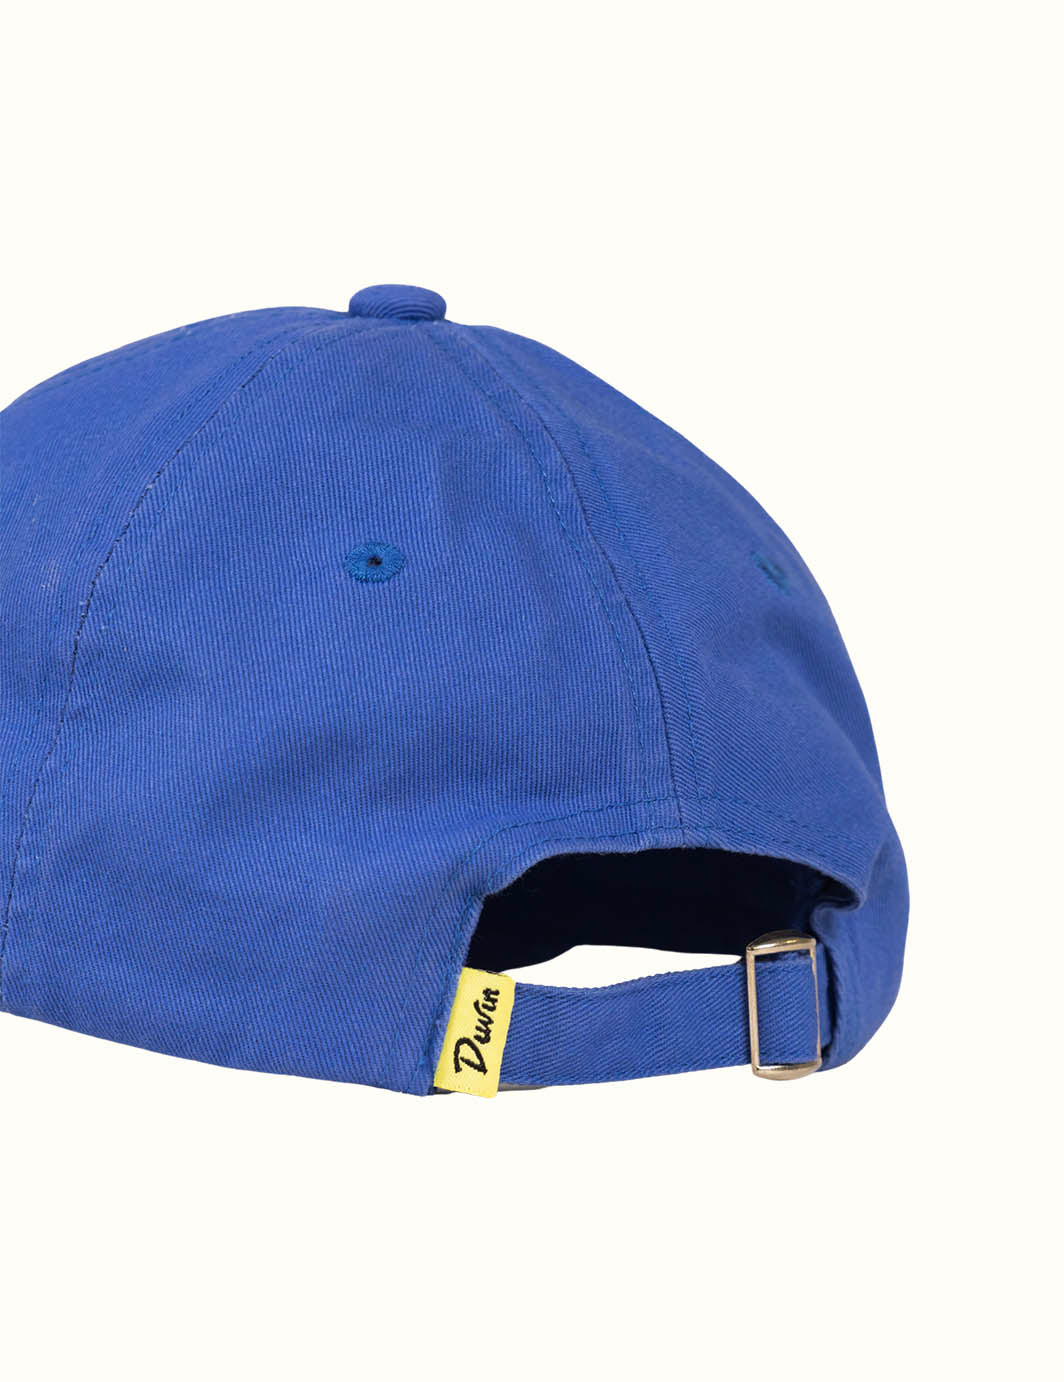 Retired Hat Blue (SP 24)